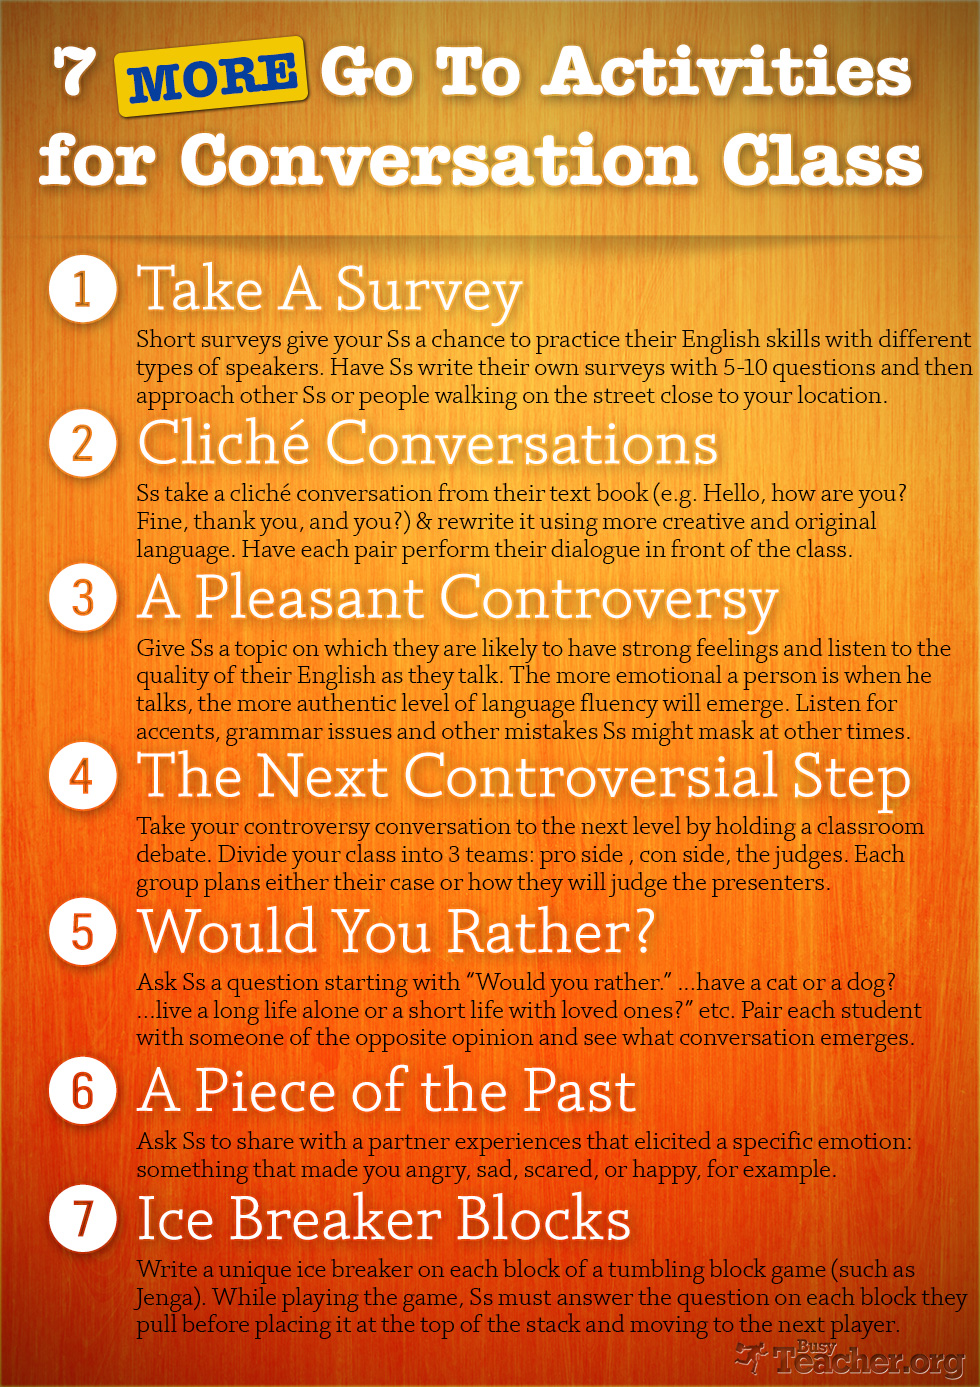 7 More Go To Activities for Conversation Class: Poster